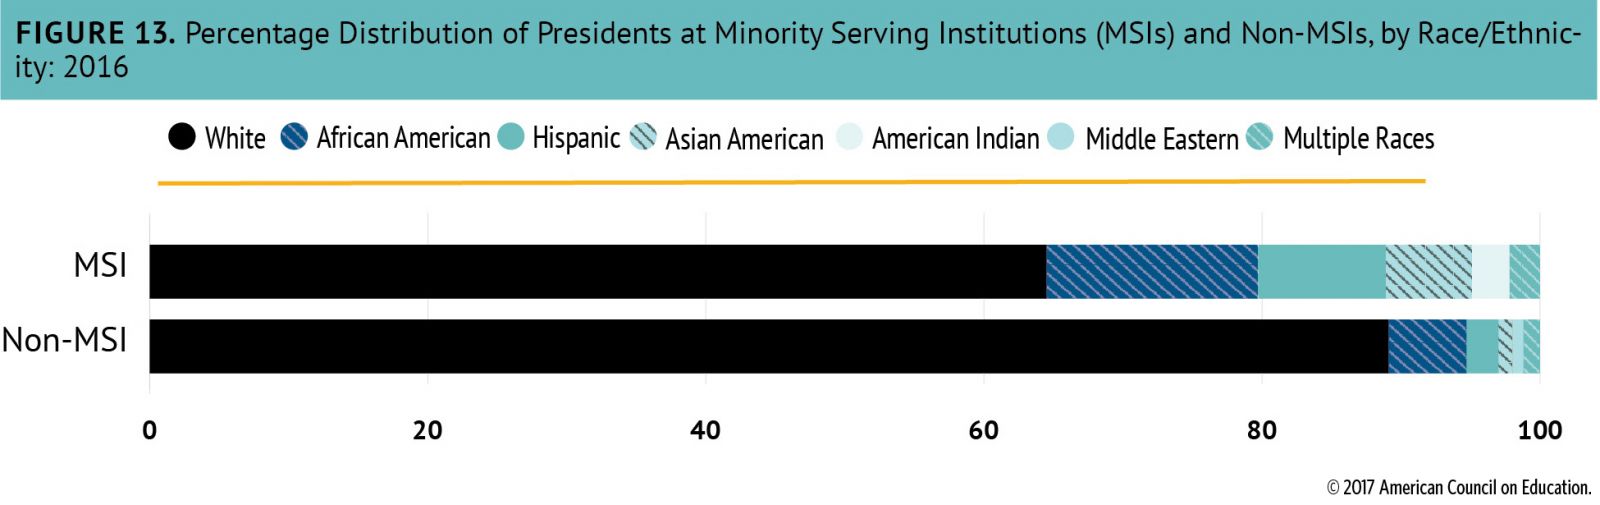 Chart: Percentage Distribution of Presidents at Minority-Serving Institutions and Non-MSIs, by Race/Ethnicity, 2016